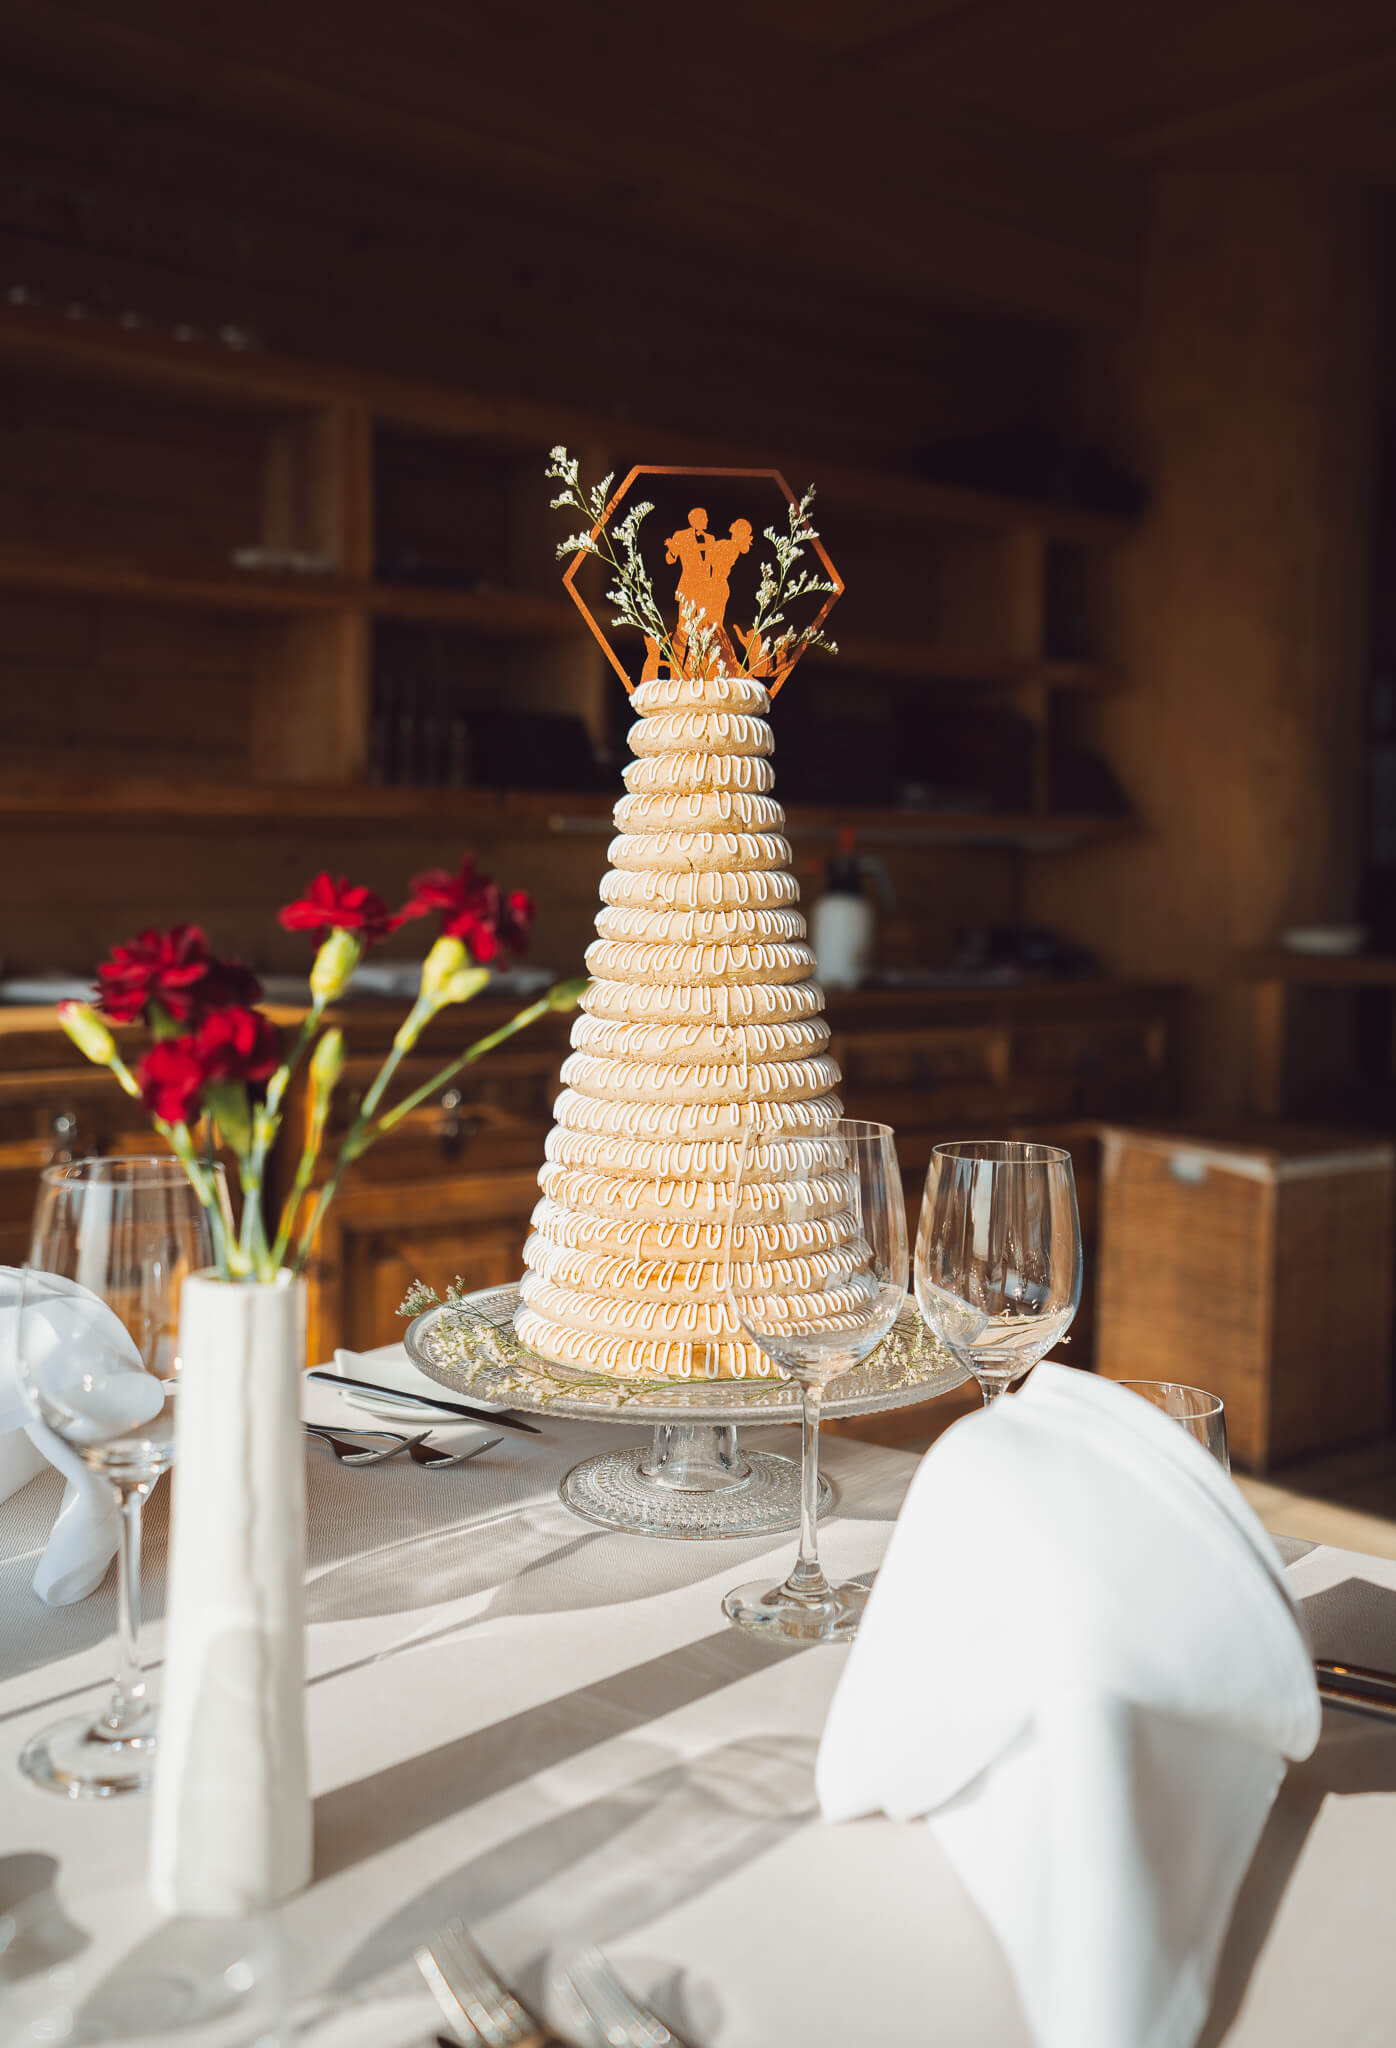 Kransakaka, a traditional Icelandic Wedding cake made of almond cookies stacked high in a tower.